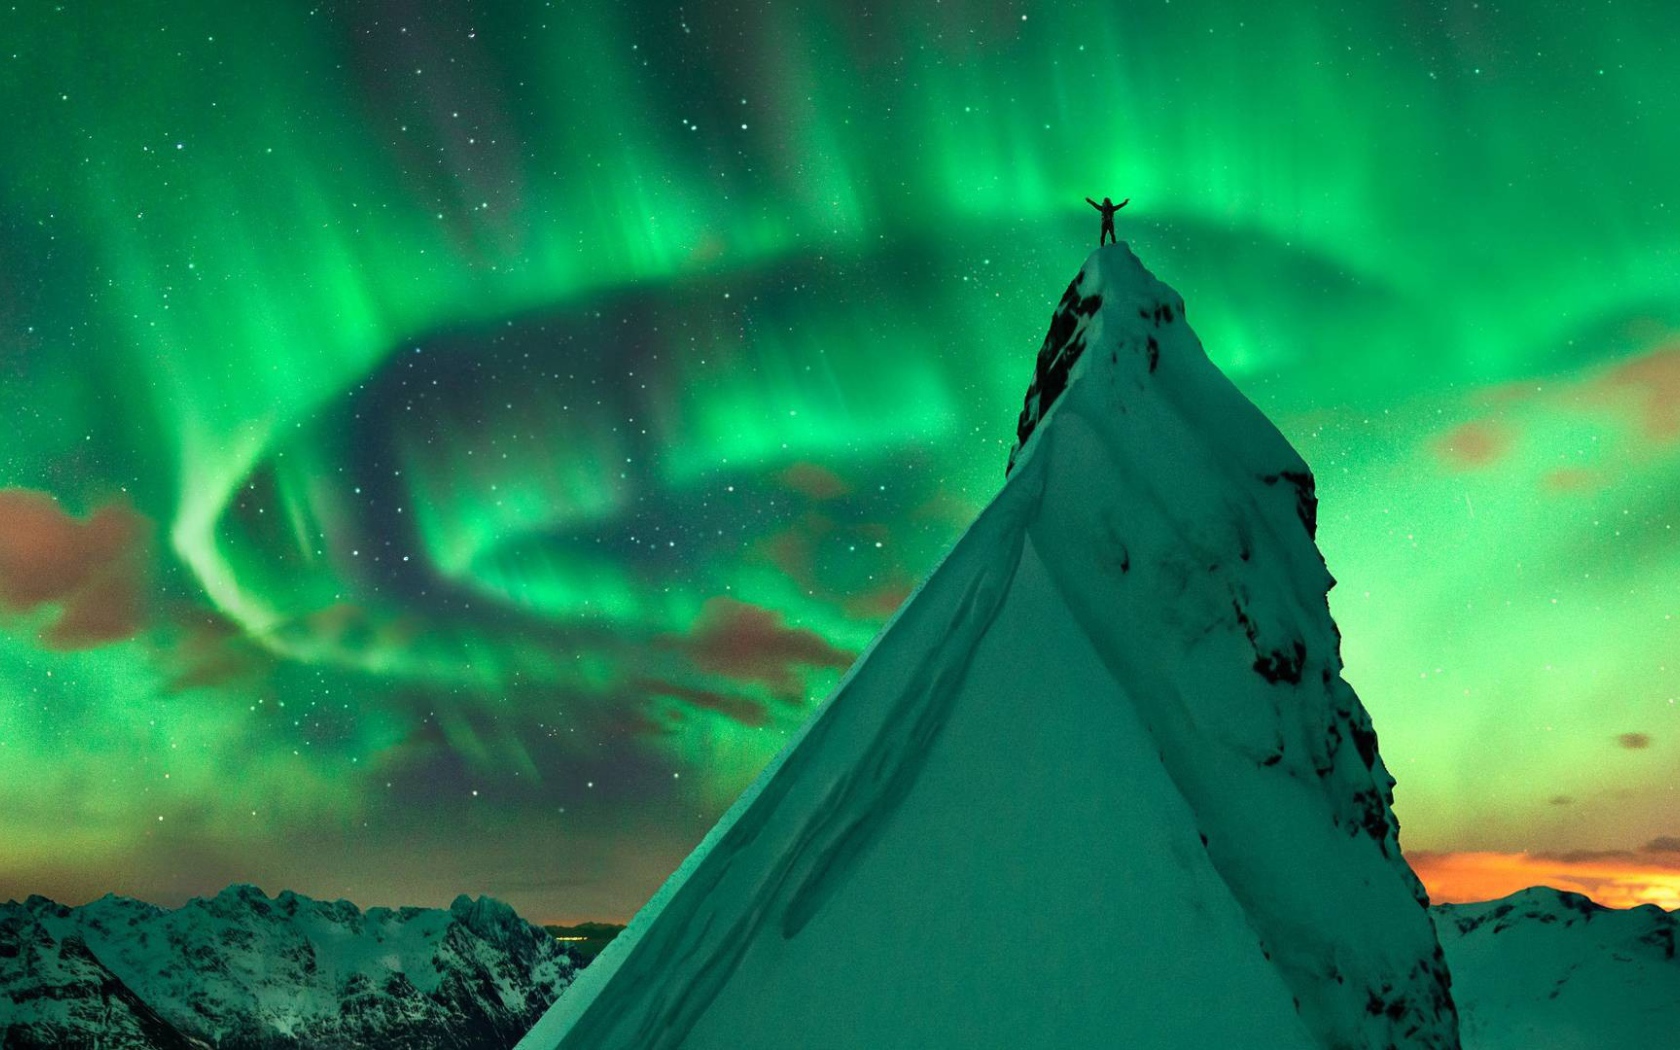 Snowy peak in the background of the Northern Lights